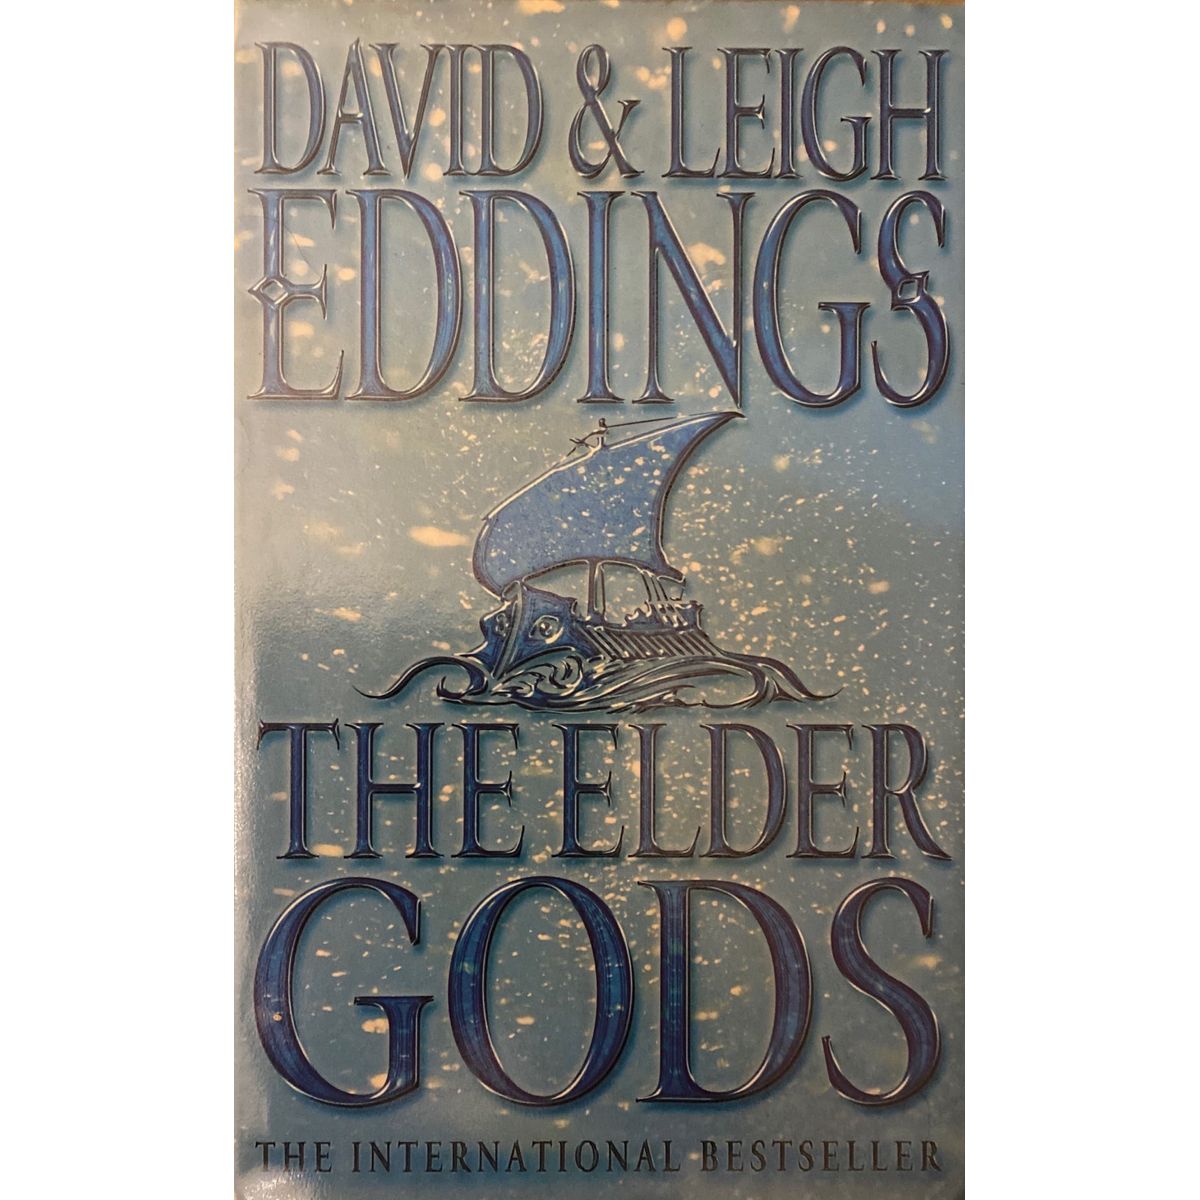 ISBN: 9780007157587 / 0007157584 - The Elder Gods: Book One of The Dreamers by David & Leigh Eddings [2003]